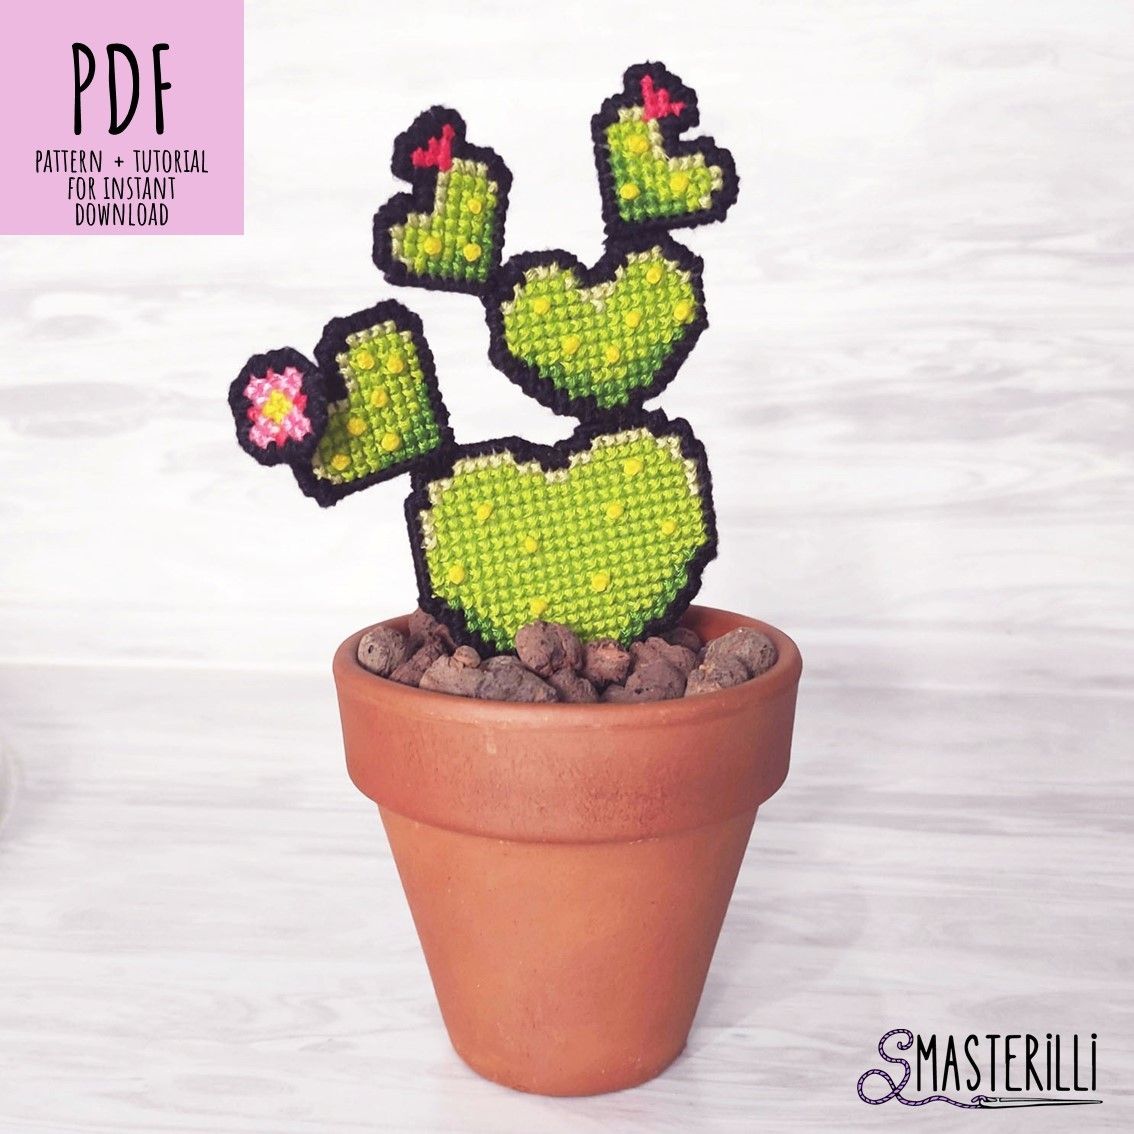 3D realistic potted cactus cross stitch pattern for plastic canvas. Pattern and detailed tutorial with photos and instructions by Smasterilli